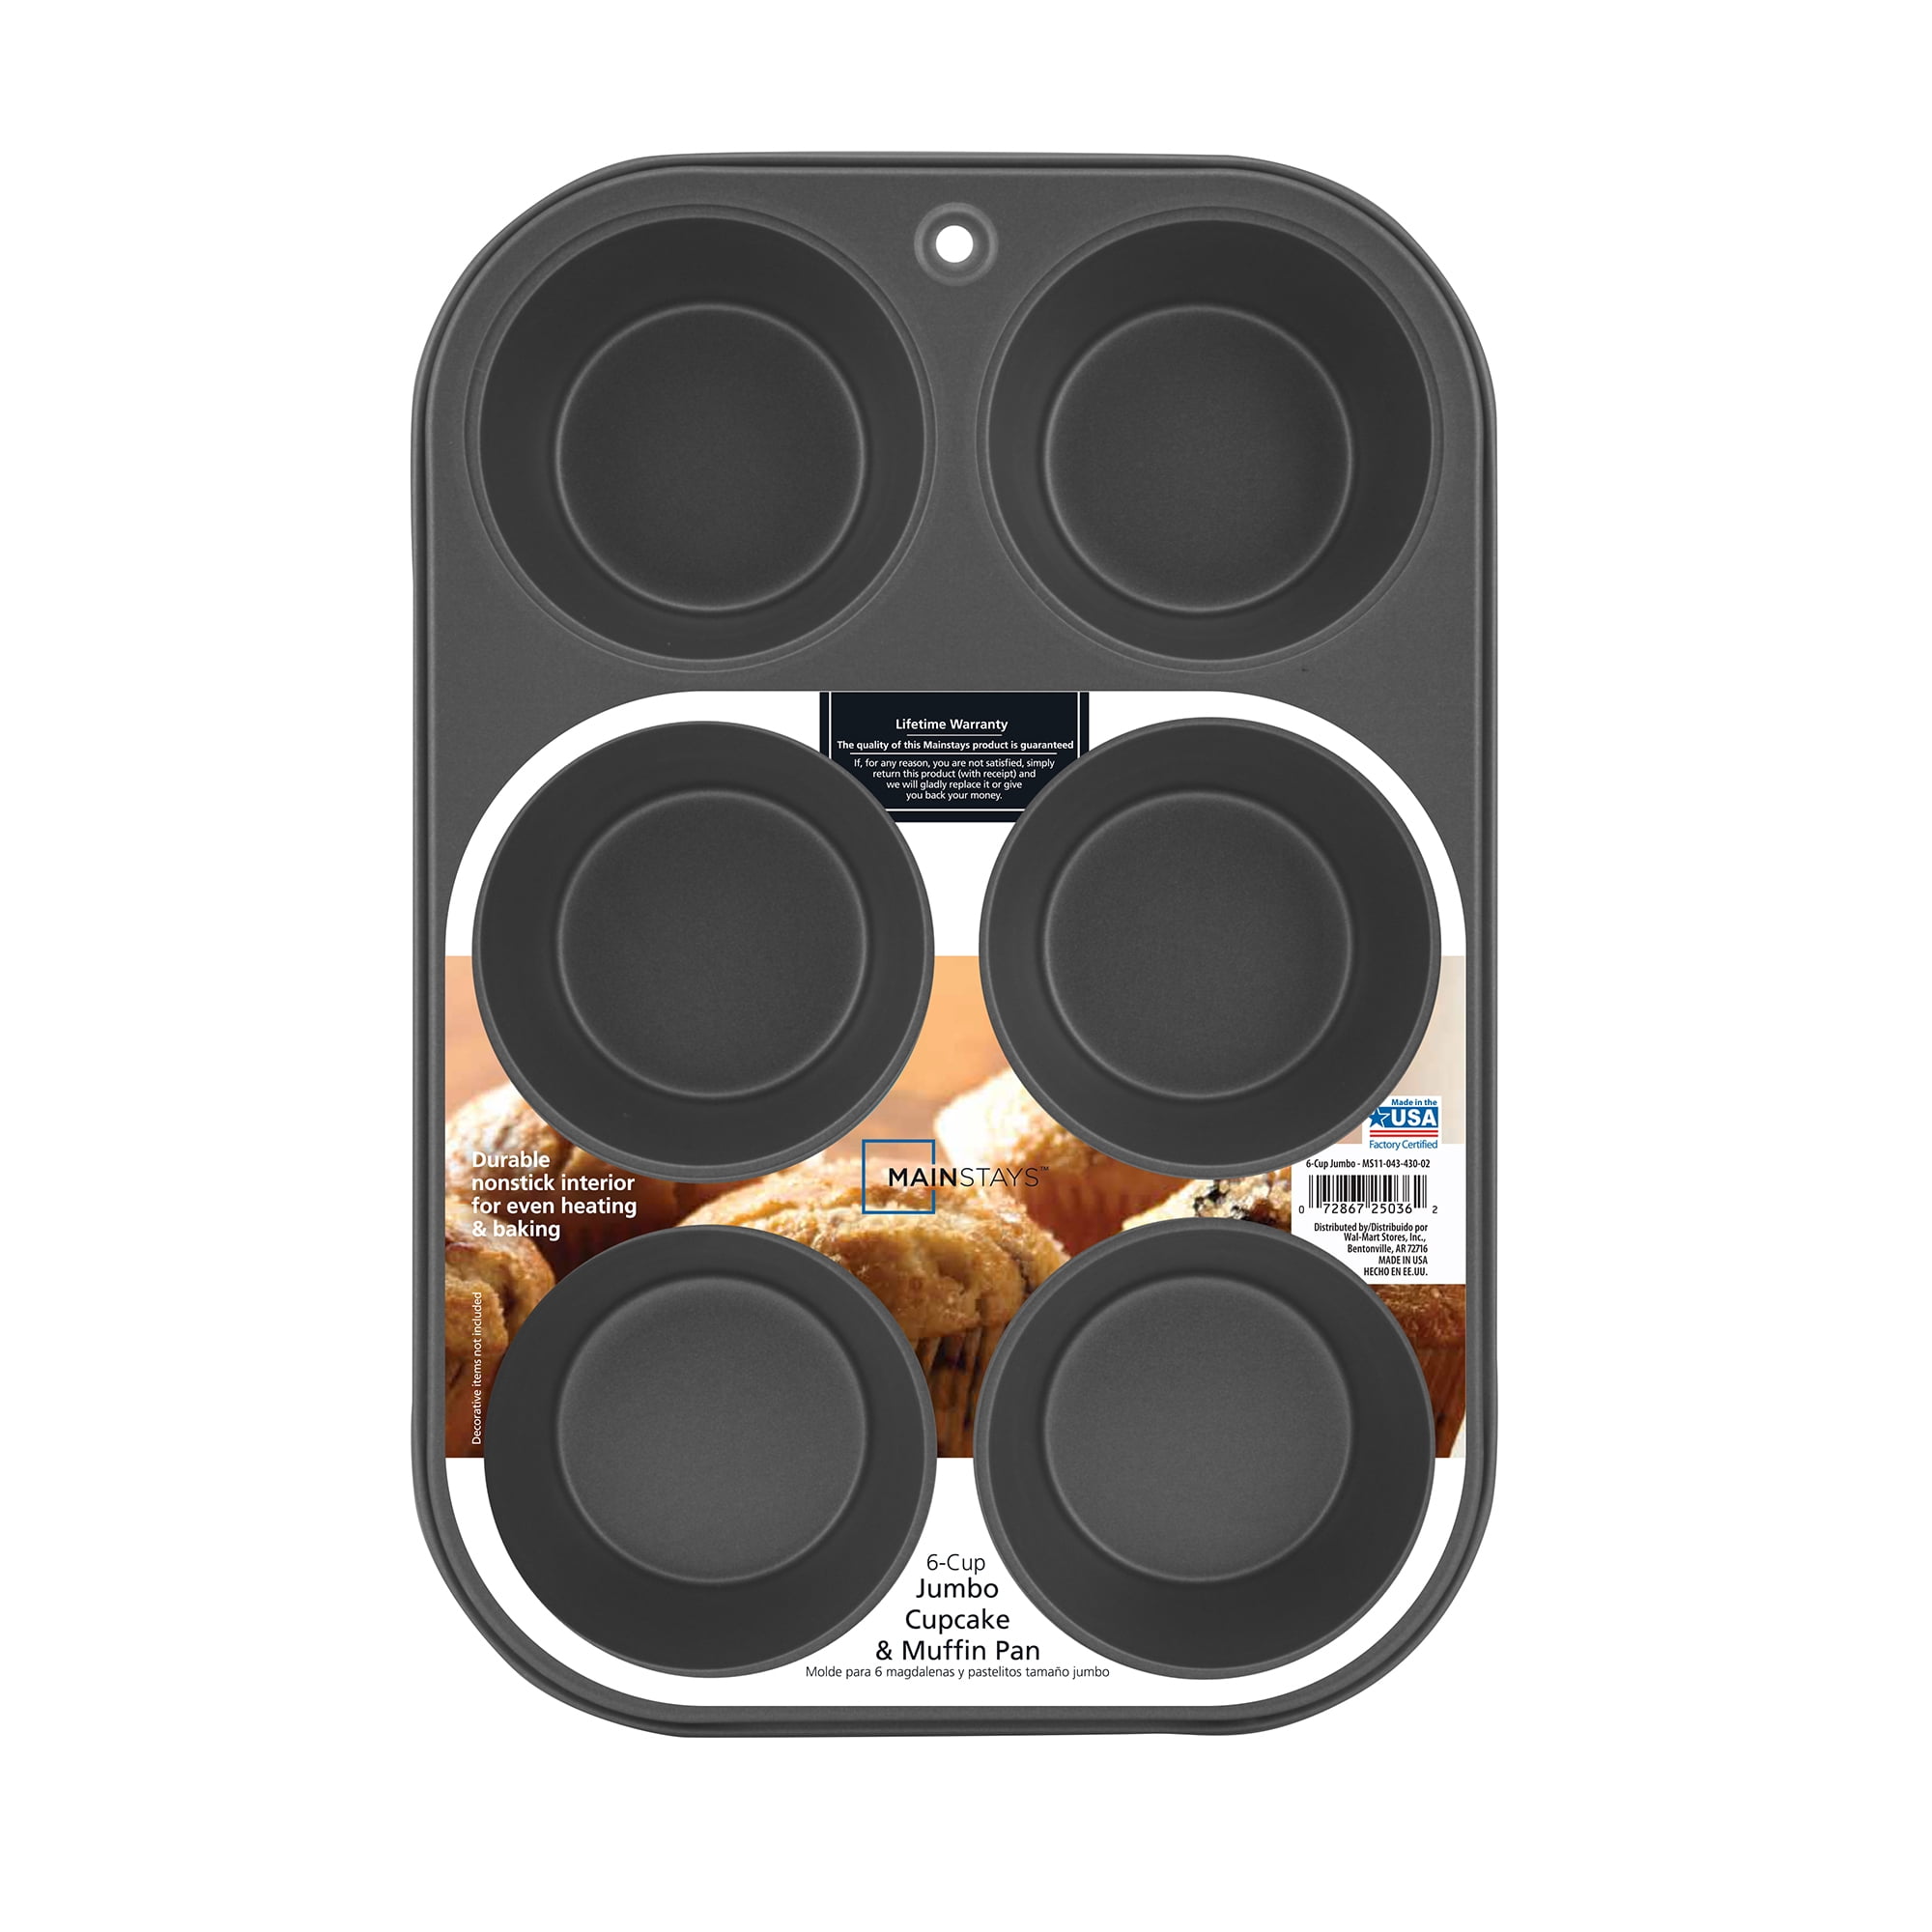 Non Stick - 6 Cup Large Muffin Pan (31.3 x 21.7 x 4cm / 12.3 x 8.5 x